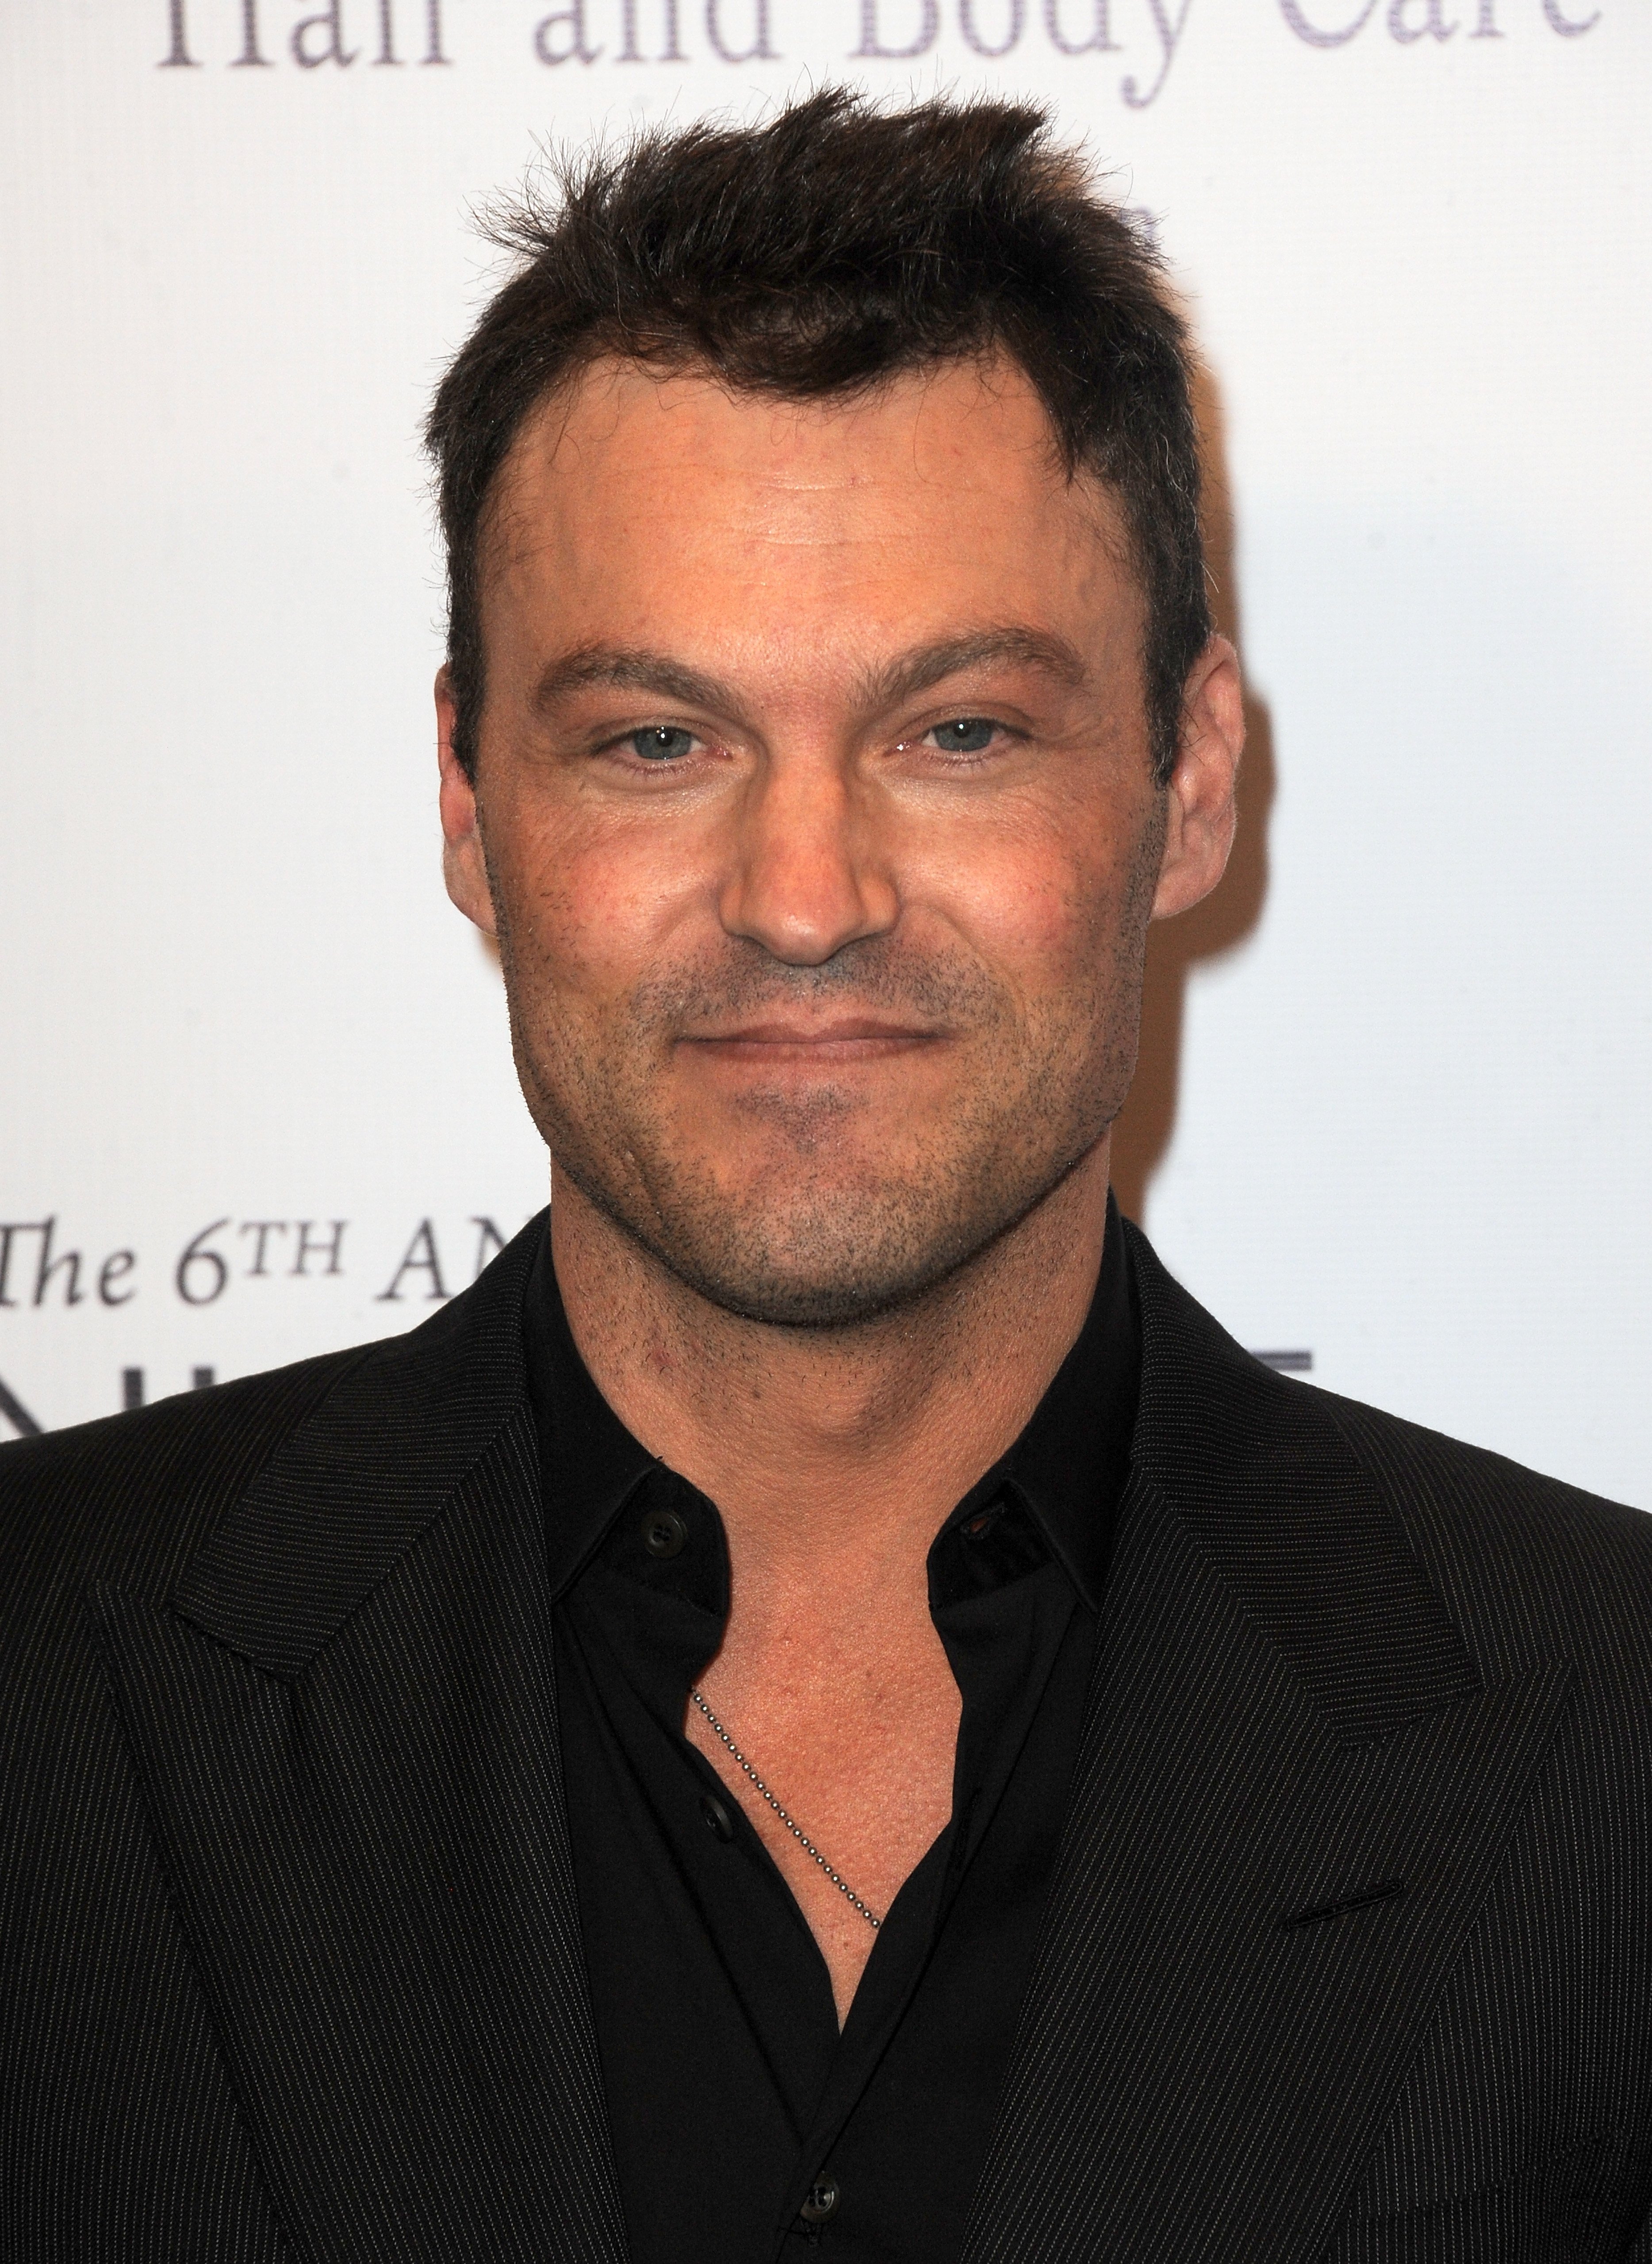 Brian Austin Green arrives for the 6th Annual Night Of Generosity Gala held at Regent Beverly Wilshire Hotel on December 5, 2014, in Beverly Hills, California. | Source: Getty images.